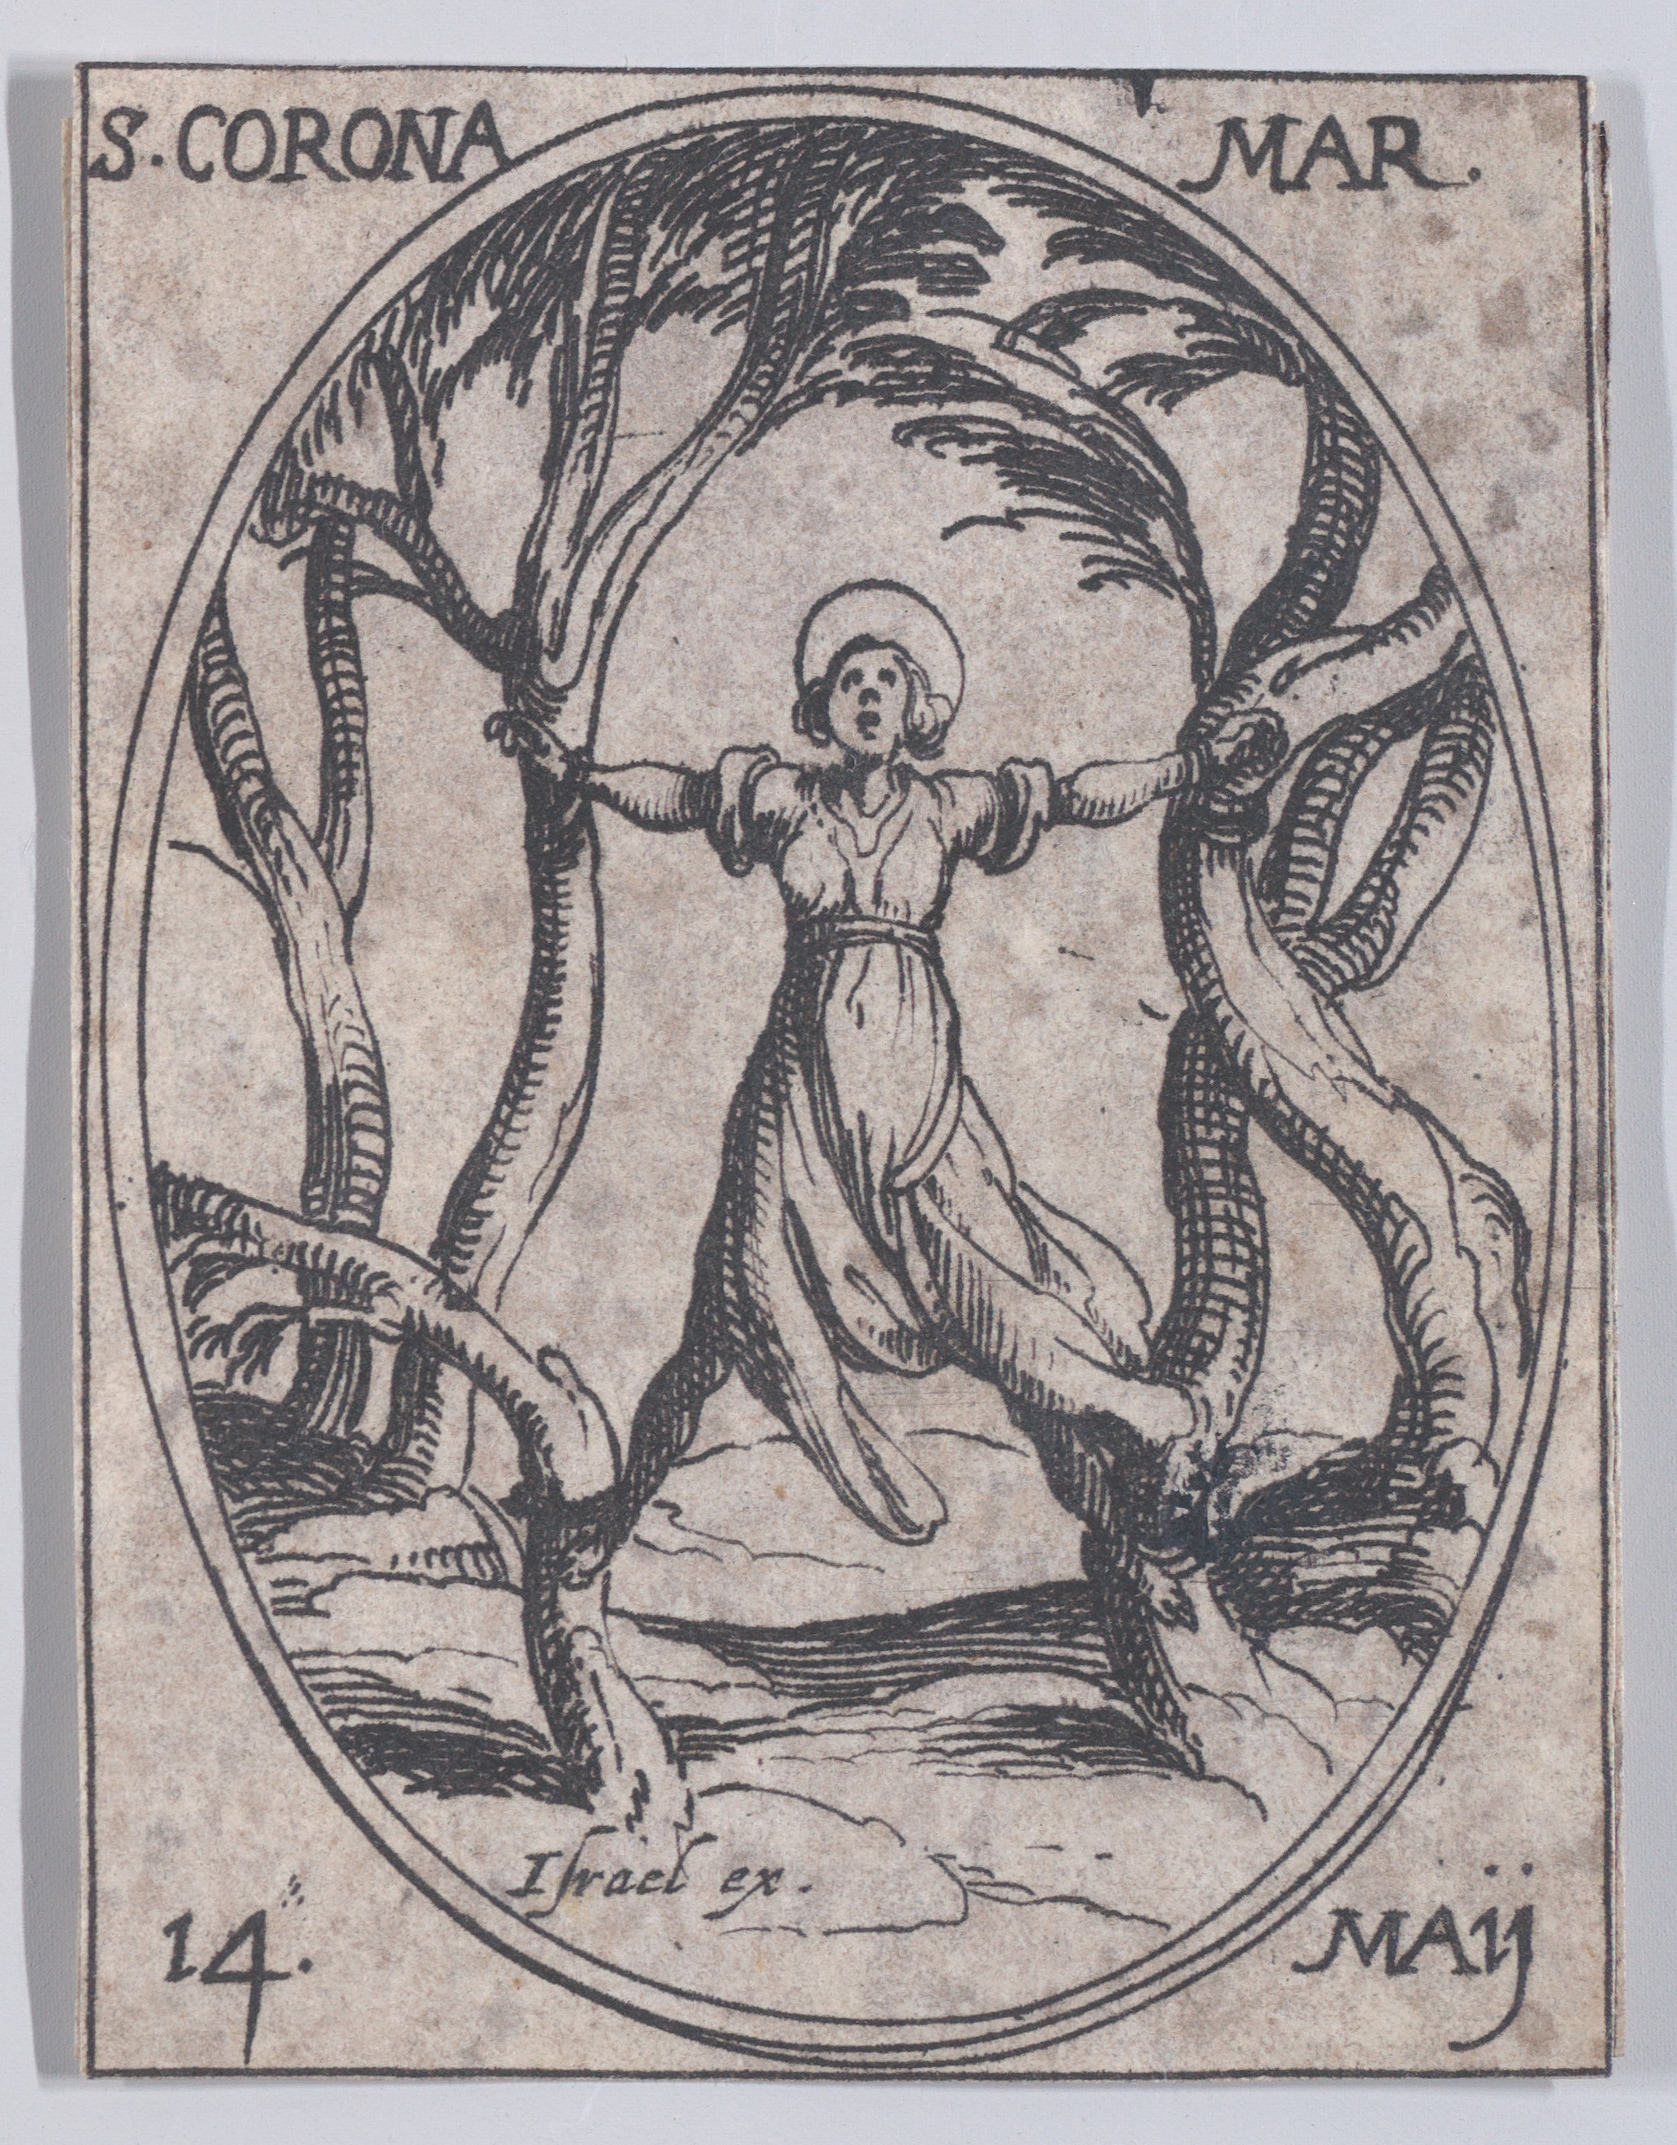 Ste. Couronne, martyre (St. Corona, Martyr), May 14th, from Les Images De Tous Les Saincts et Saintes de L'Année (Images of All of the Saints and Religious Events of the Year), Jacques Callot (French, Nancy 1592–1635 Nancy), Etching; second state of two (Lieure)